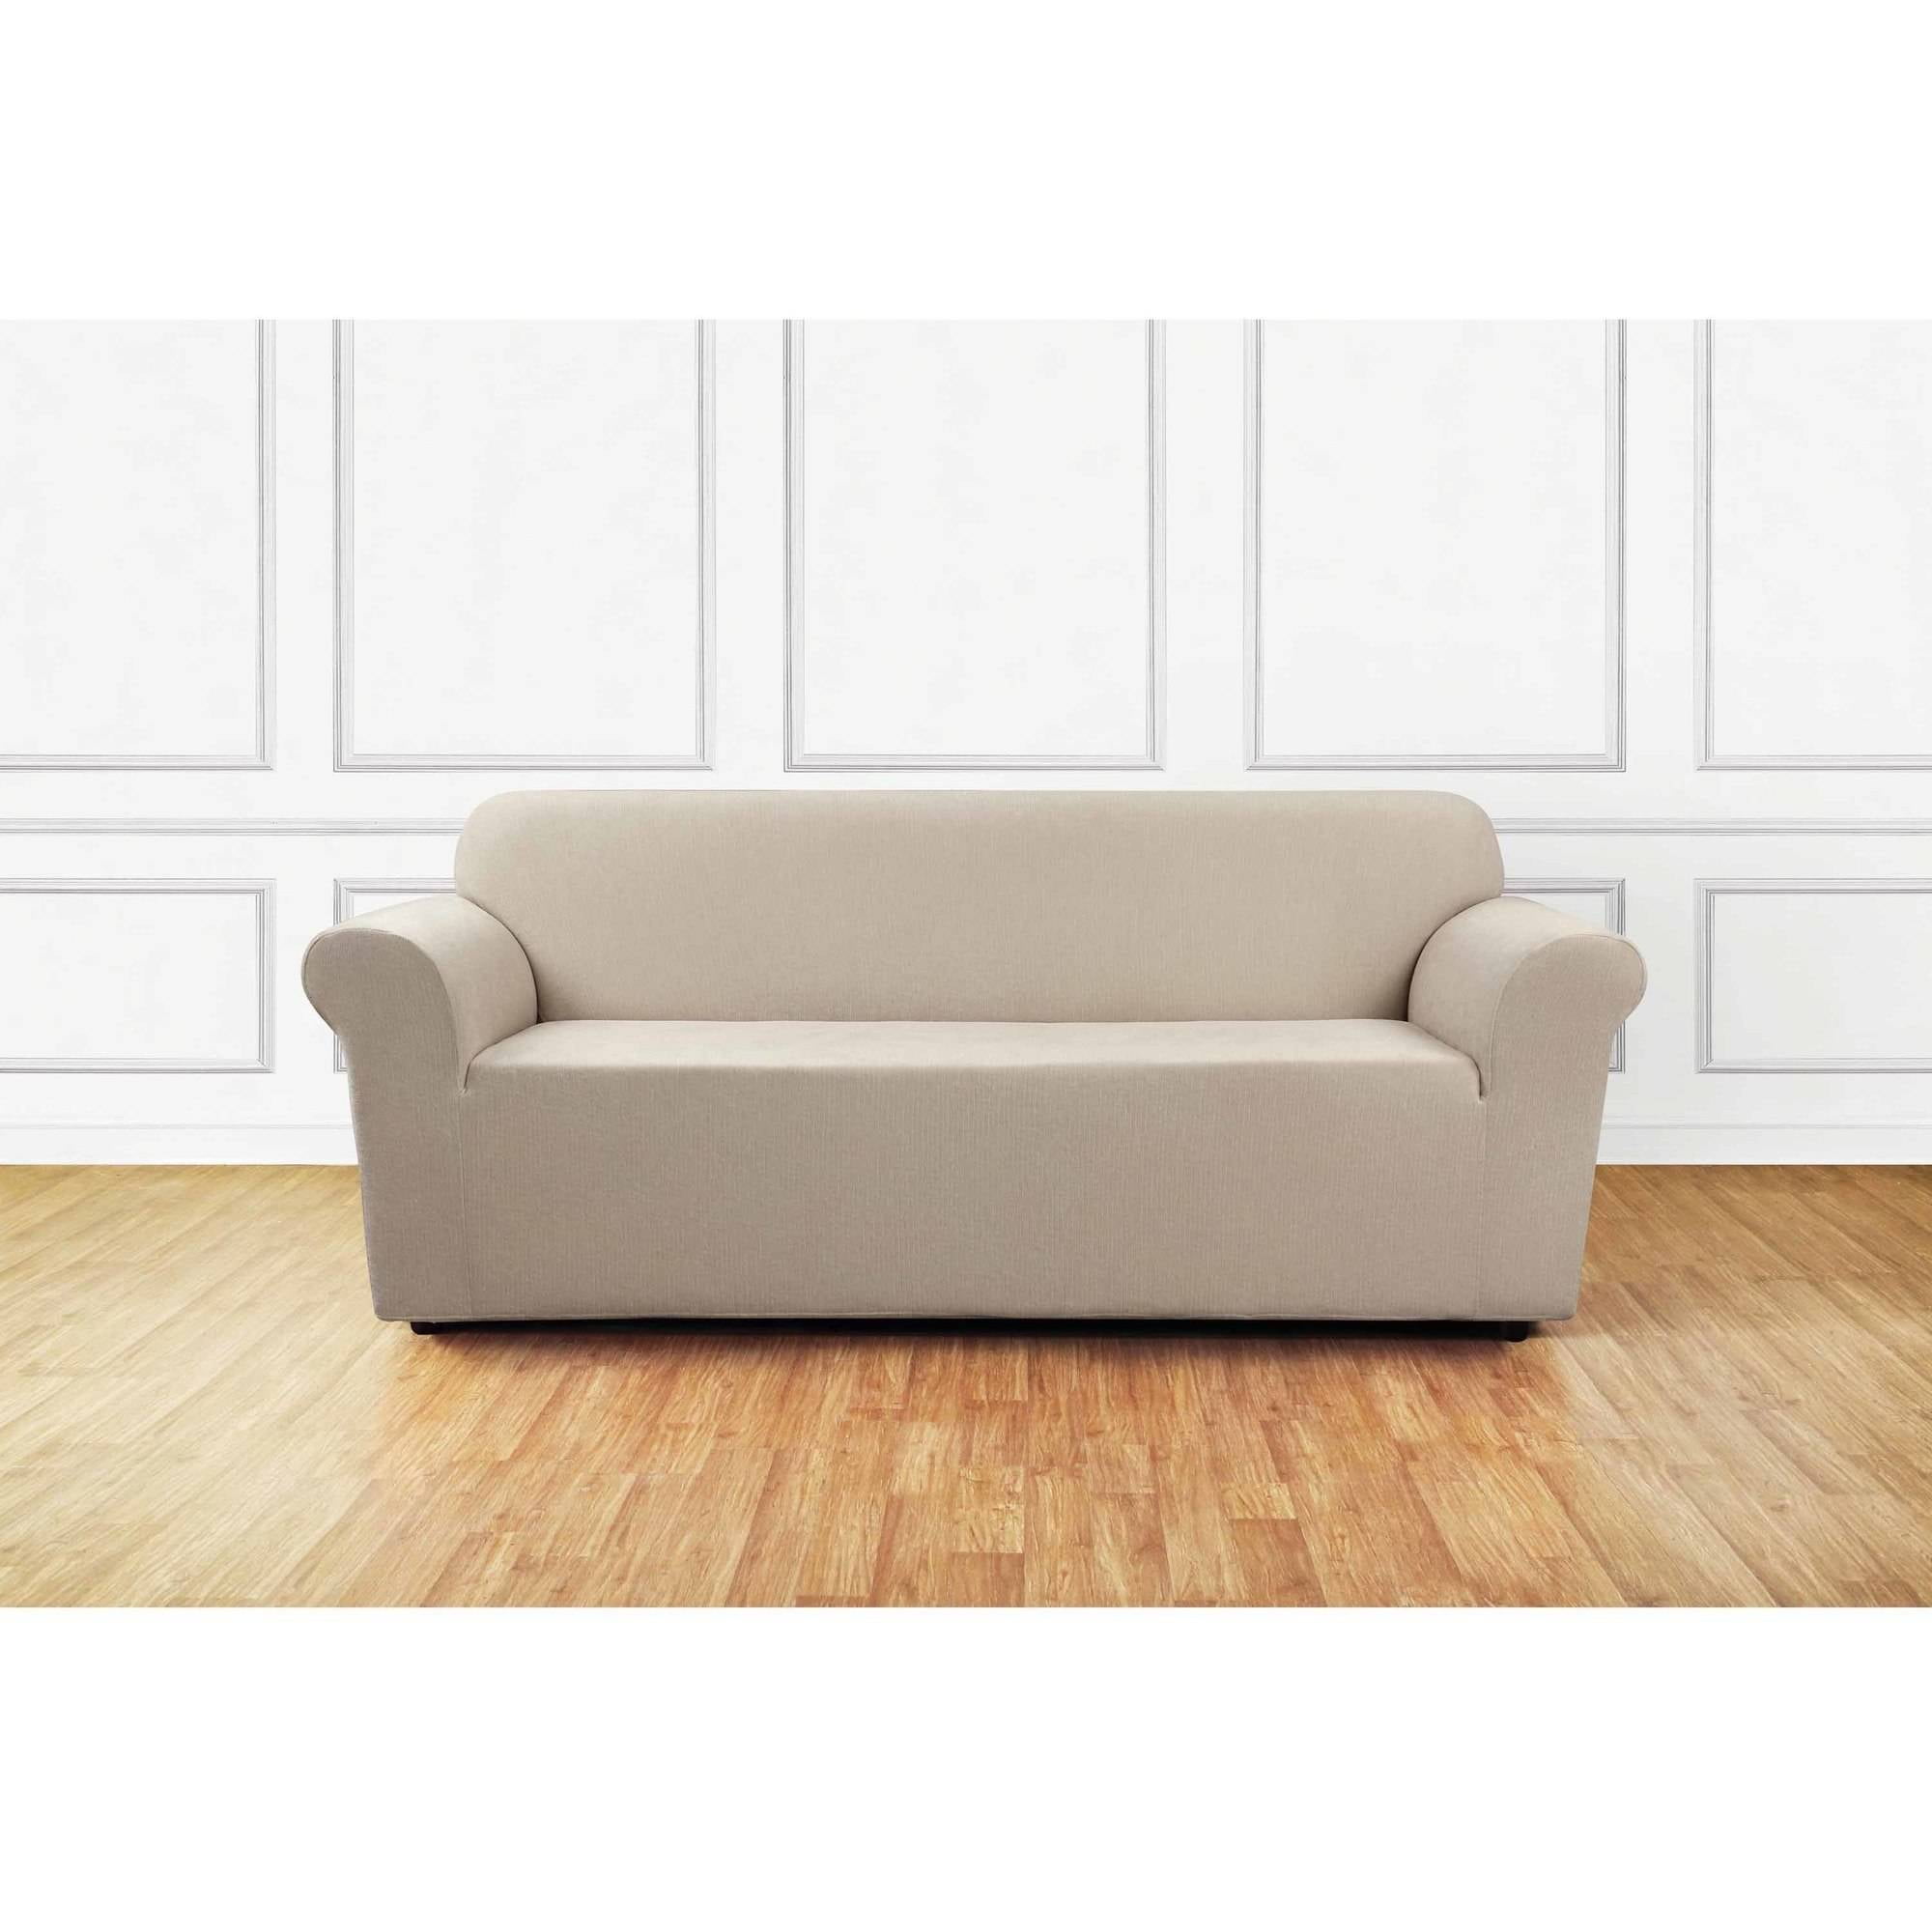 Sure Fit Everyday Chenille 1 piece Love Seat Slipcover Box Cushion in Tan/Cream 